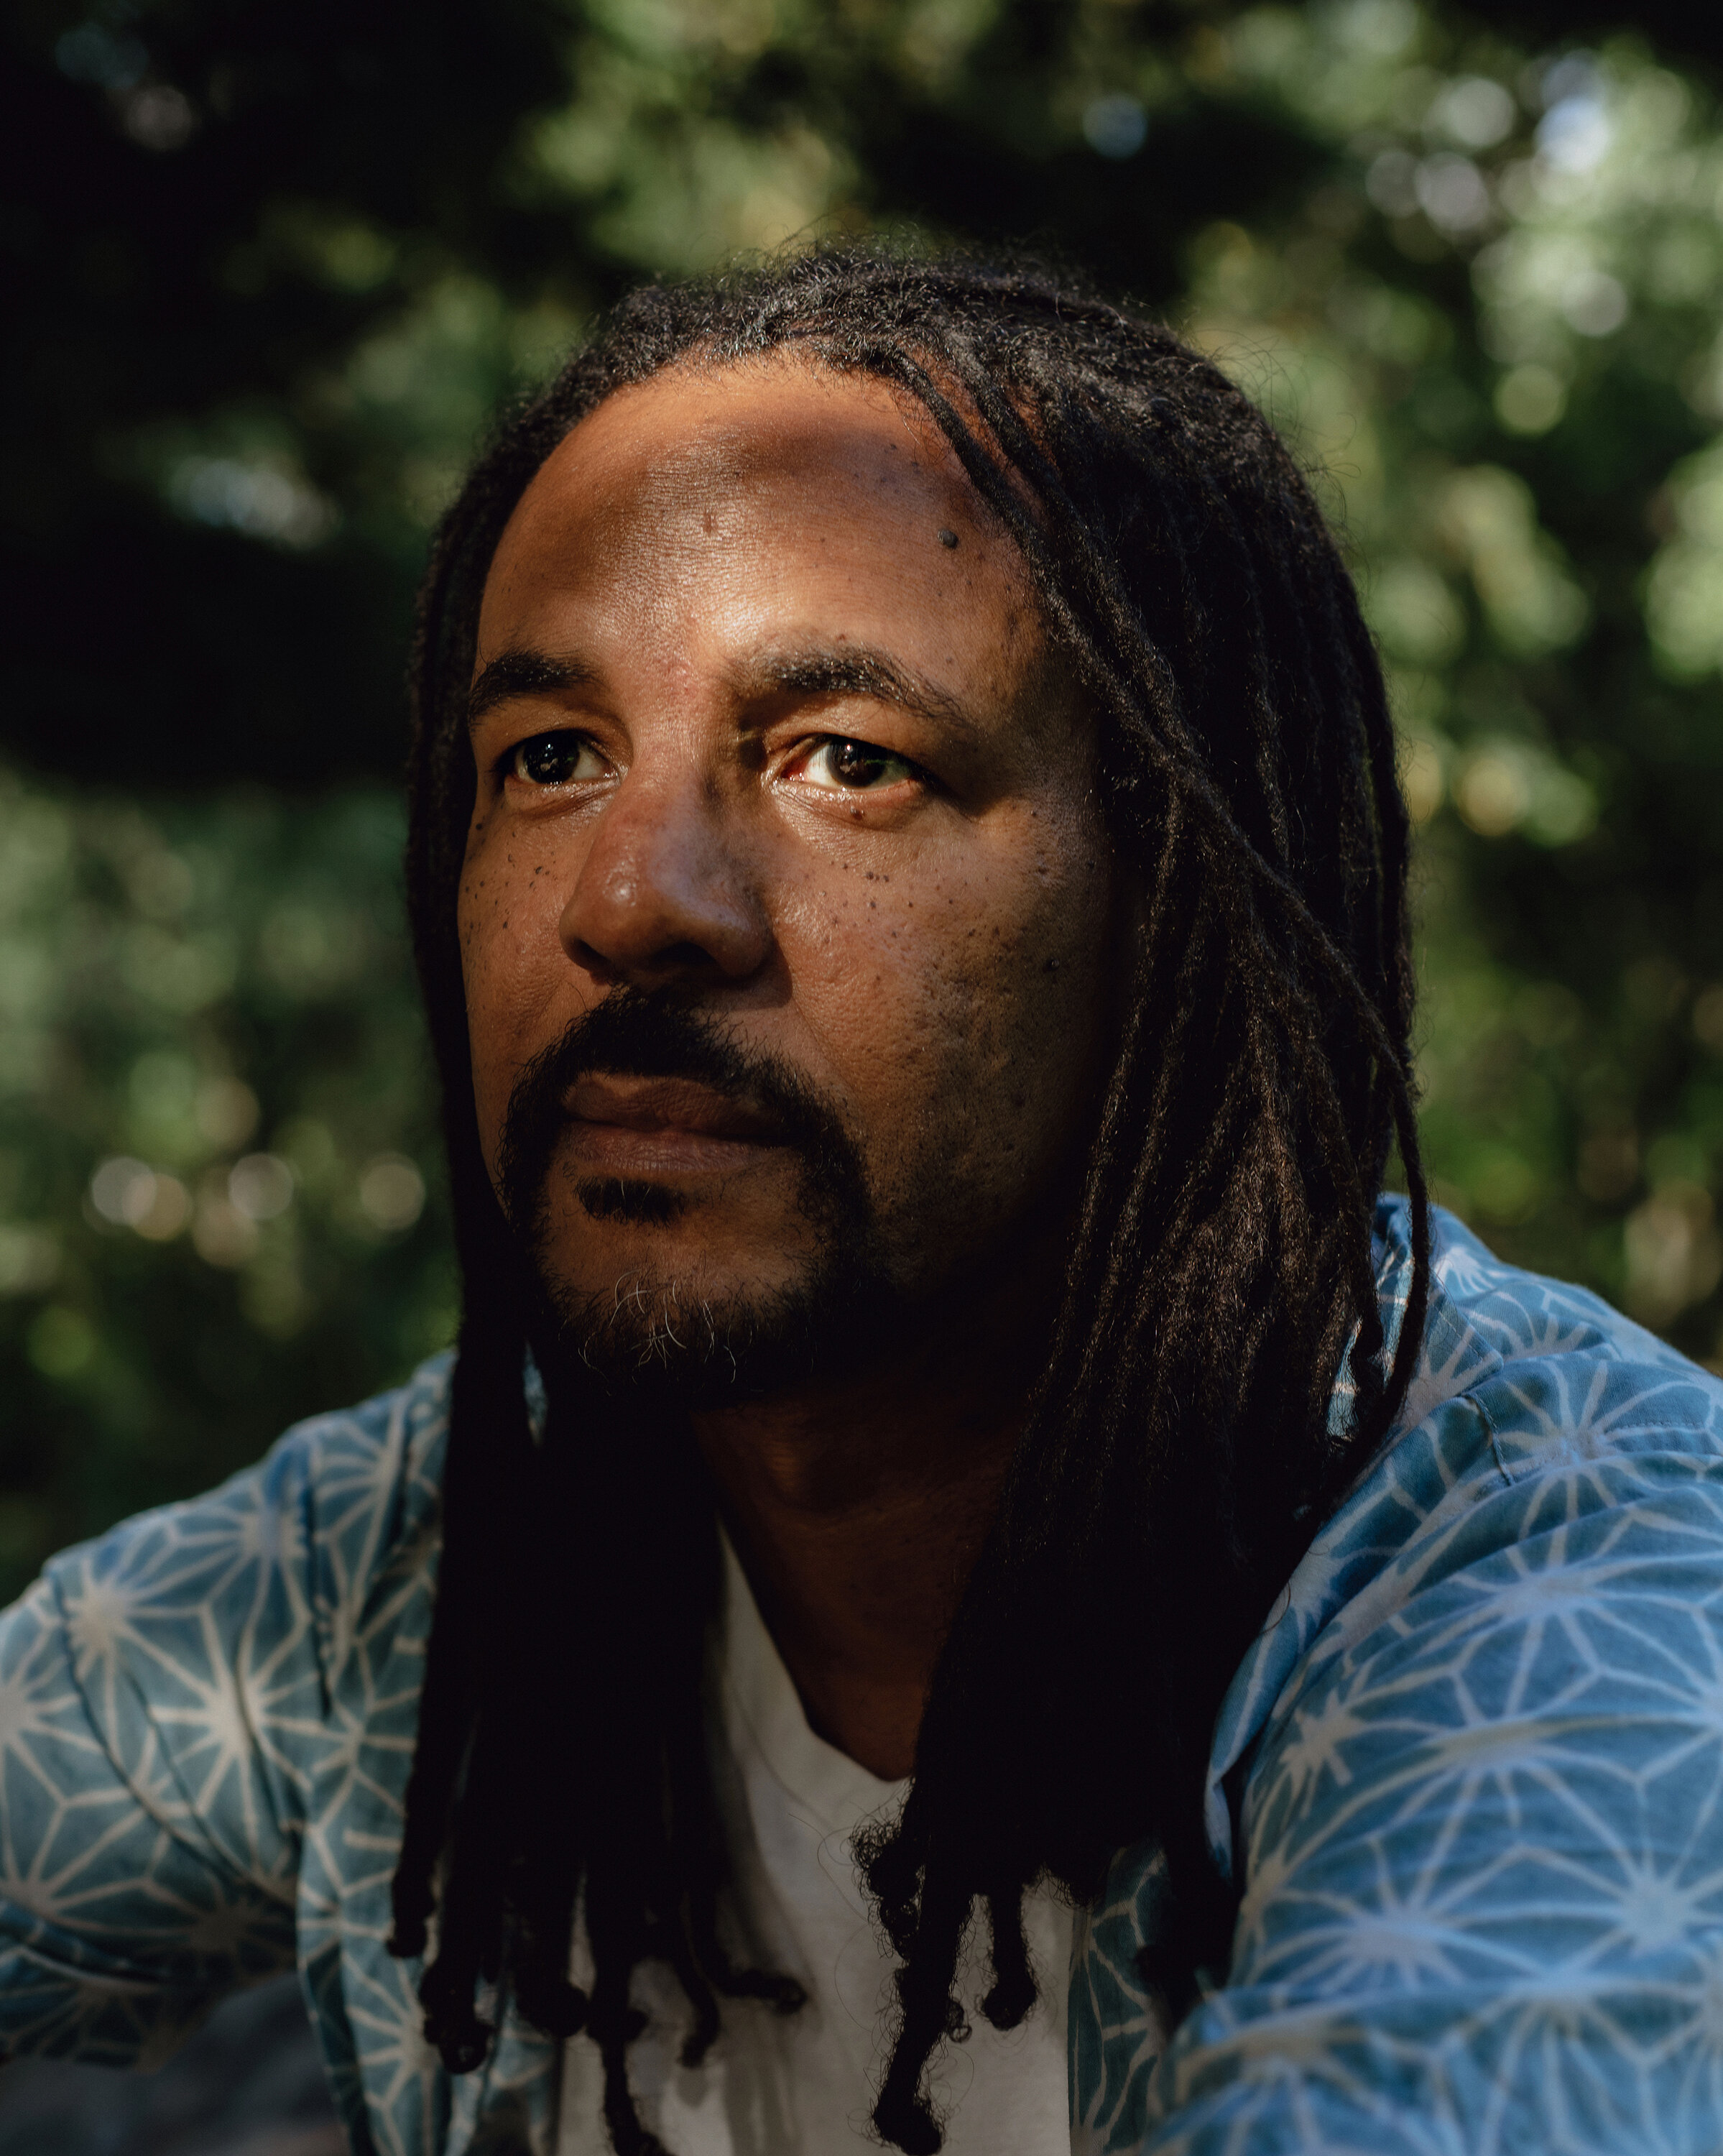  Colson Whitehead   The New York Times  